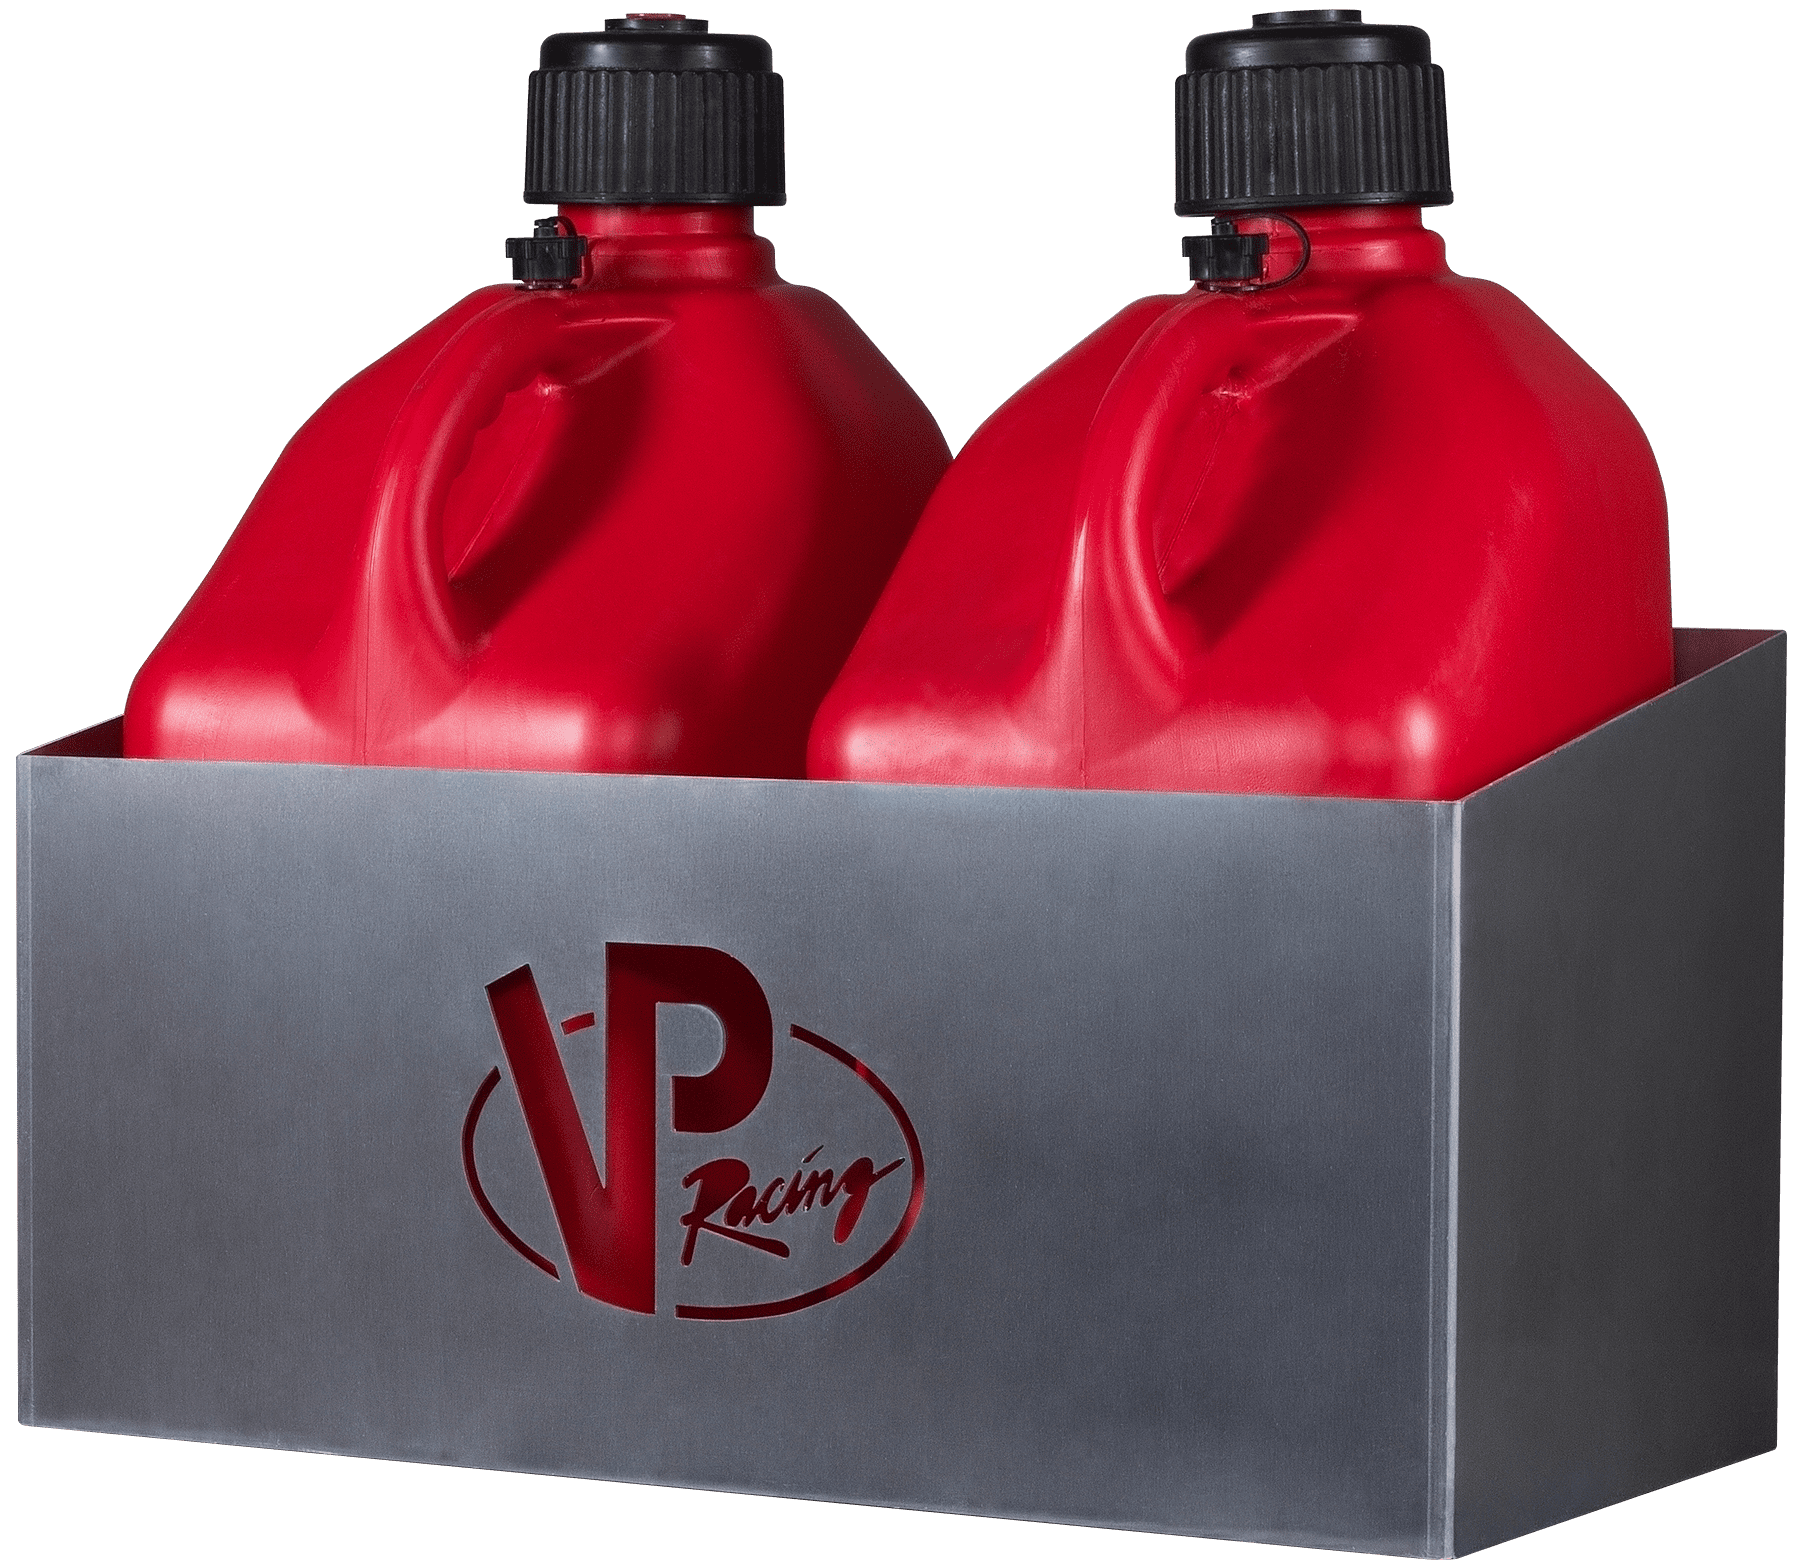 VP Racing Fuels 5 Gallon Square Motorsport Patriotic Racing Utility Container with Deluxe Filler Hose 4 Pack 